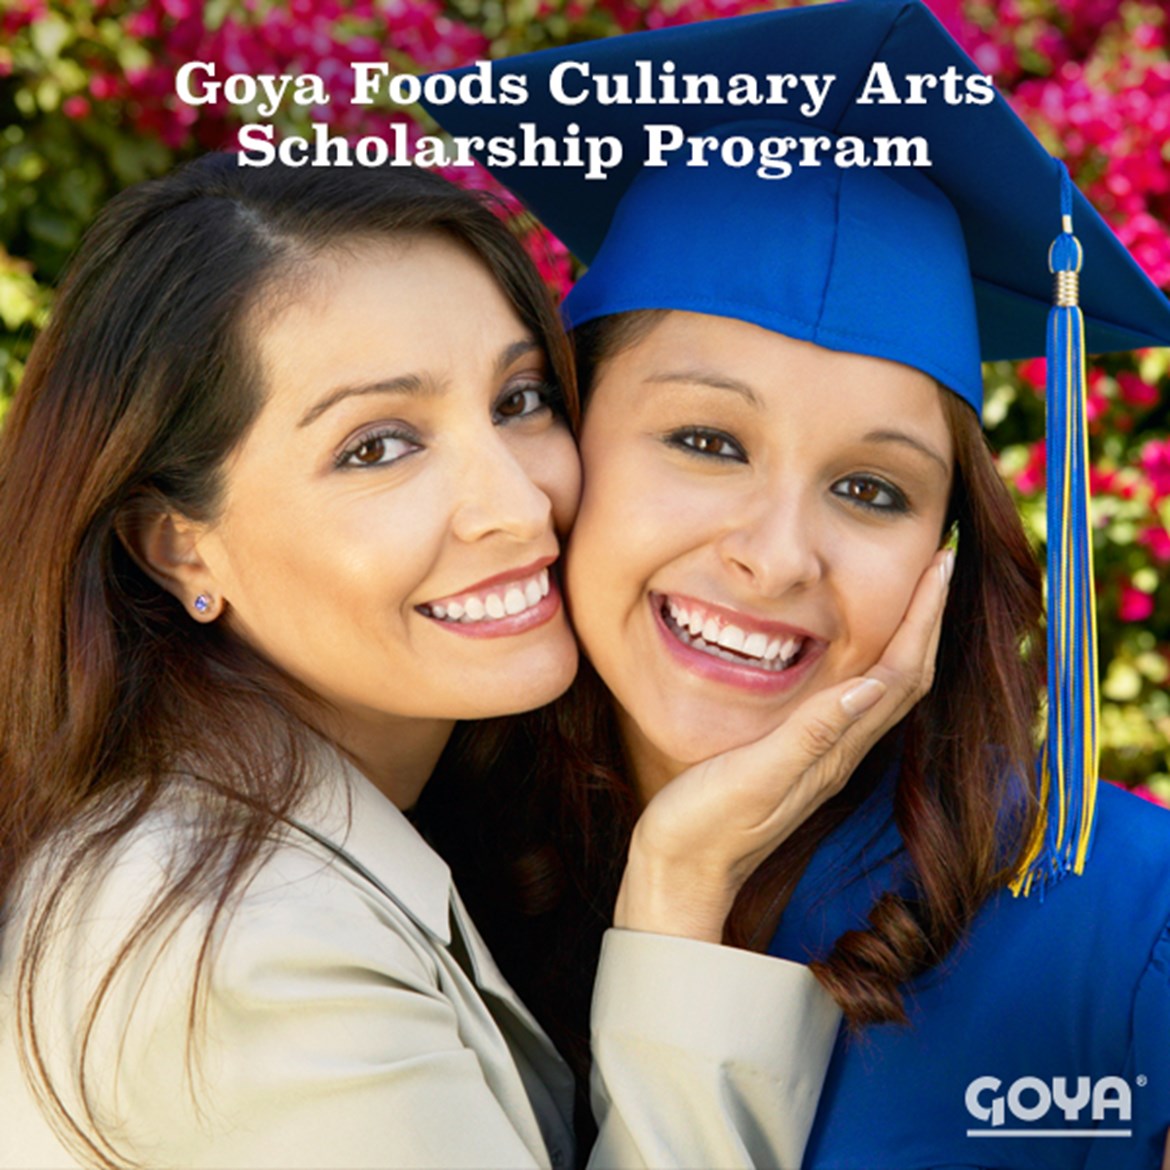 Press Release: GOYA FOODS OFFERS $100,000 CULINARY ARTS & FOOD SCIENCE SCHOLARSHIPS TO STUDENTS NATIONWIDE